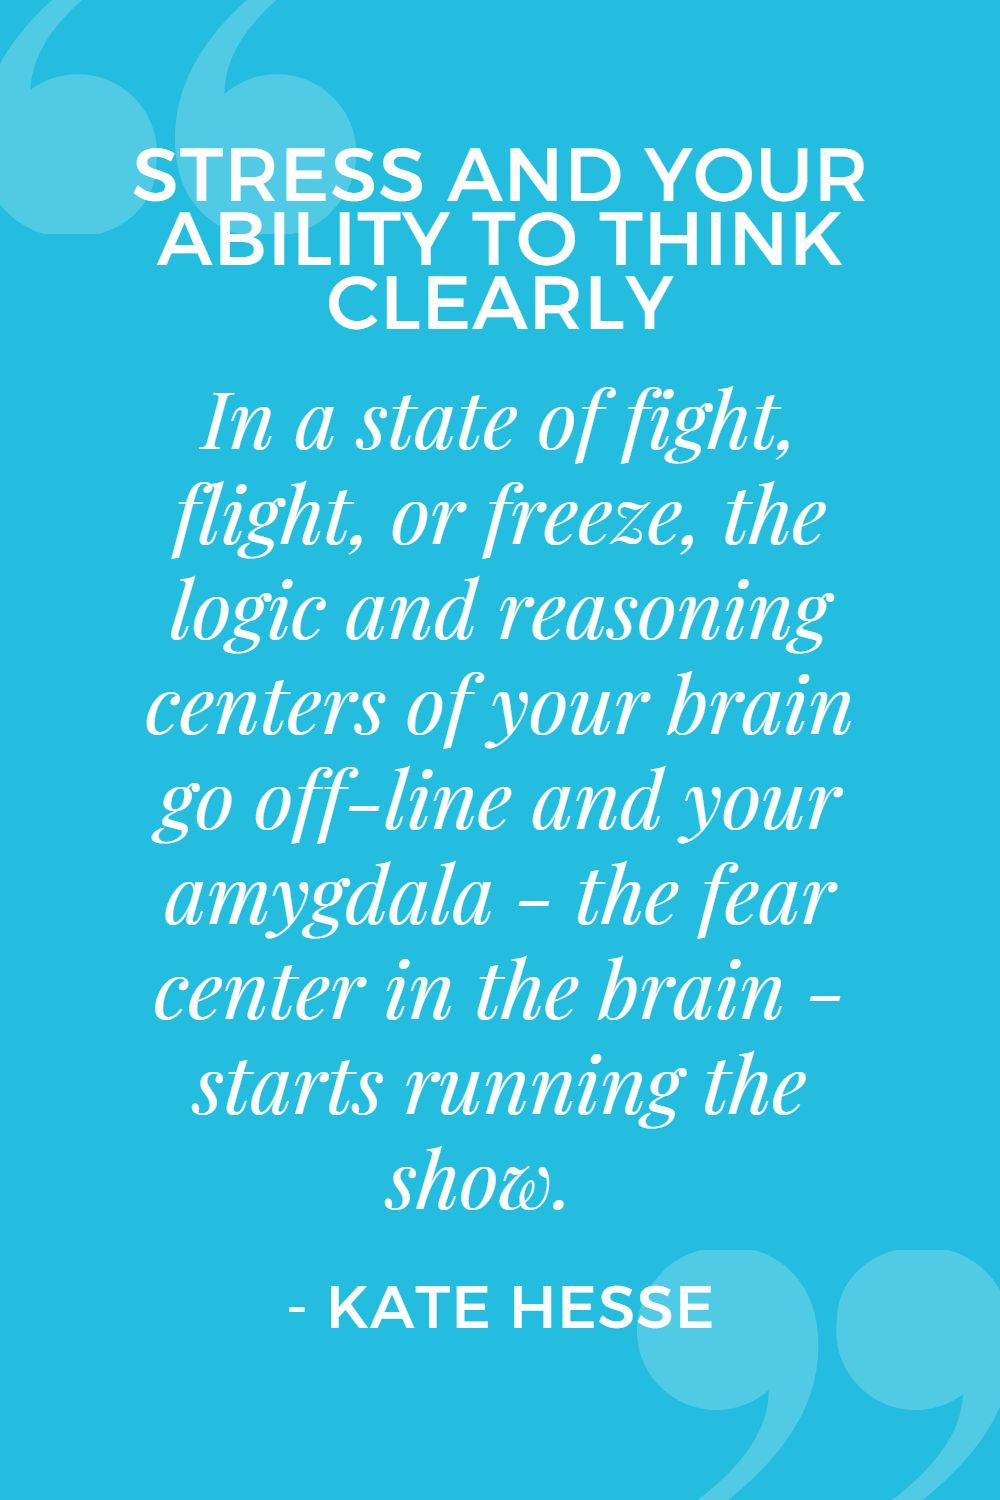 In a state of fight, flight, or freeze, the logic and reasoning centers of your brain go off-line and your amygdala - the fear center in the brain - starts running the show.